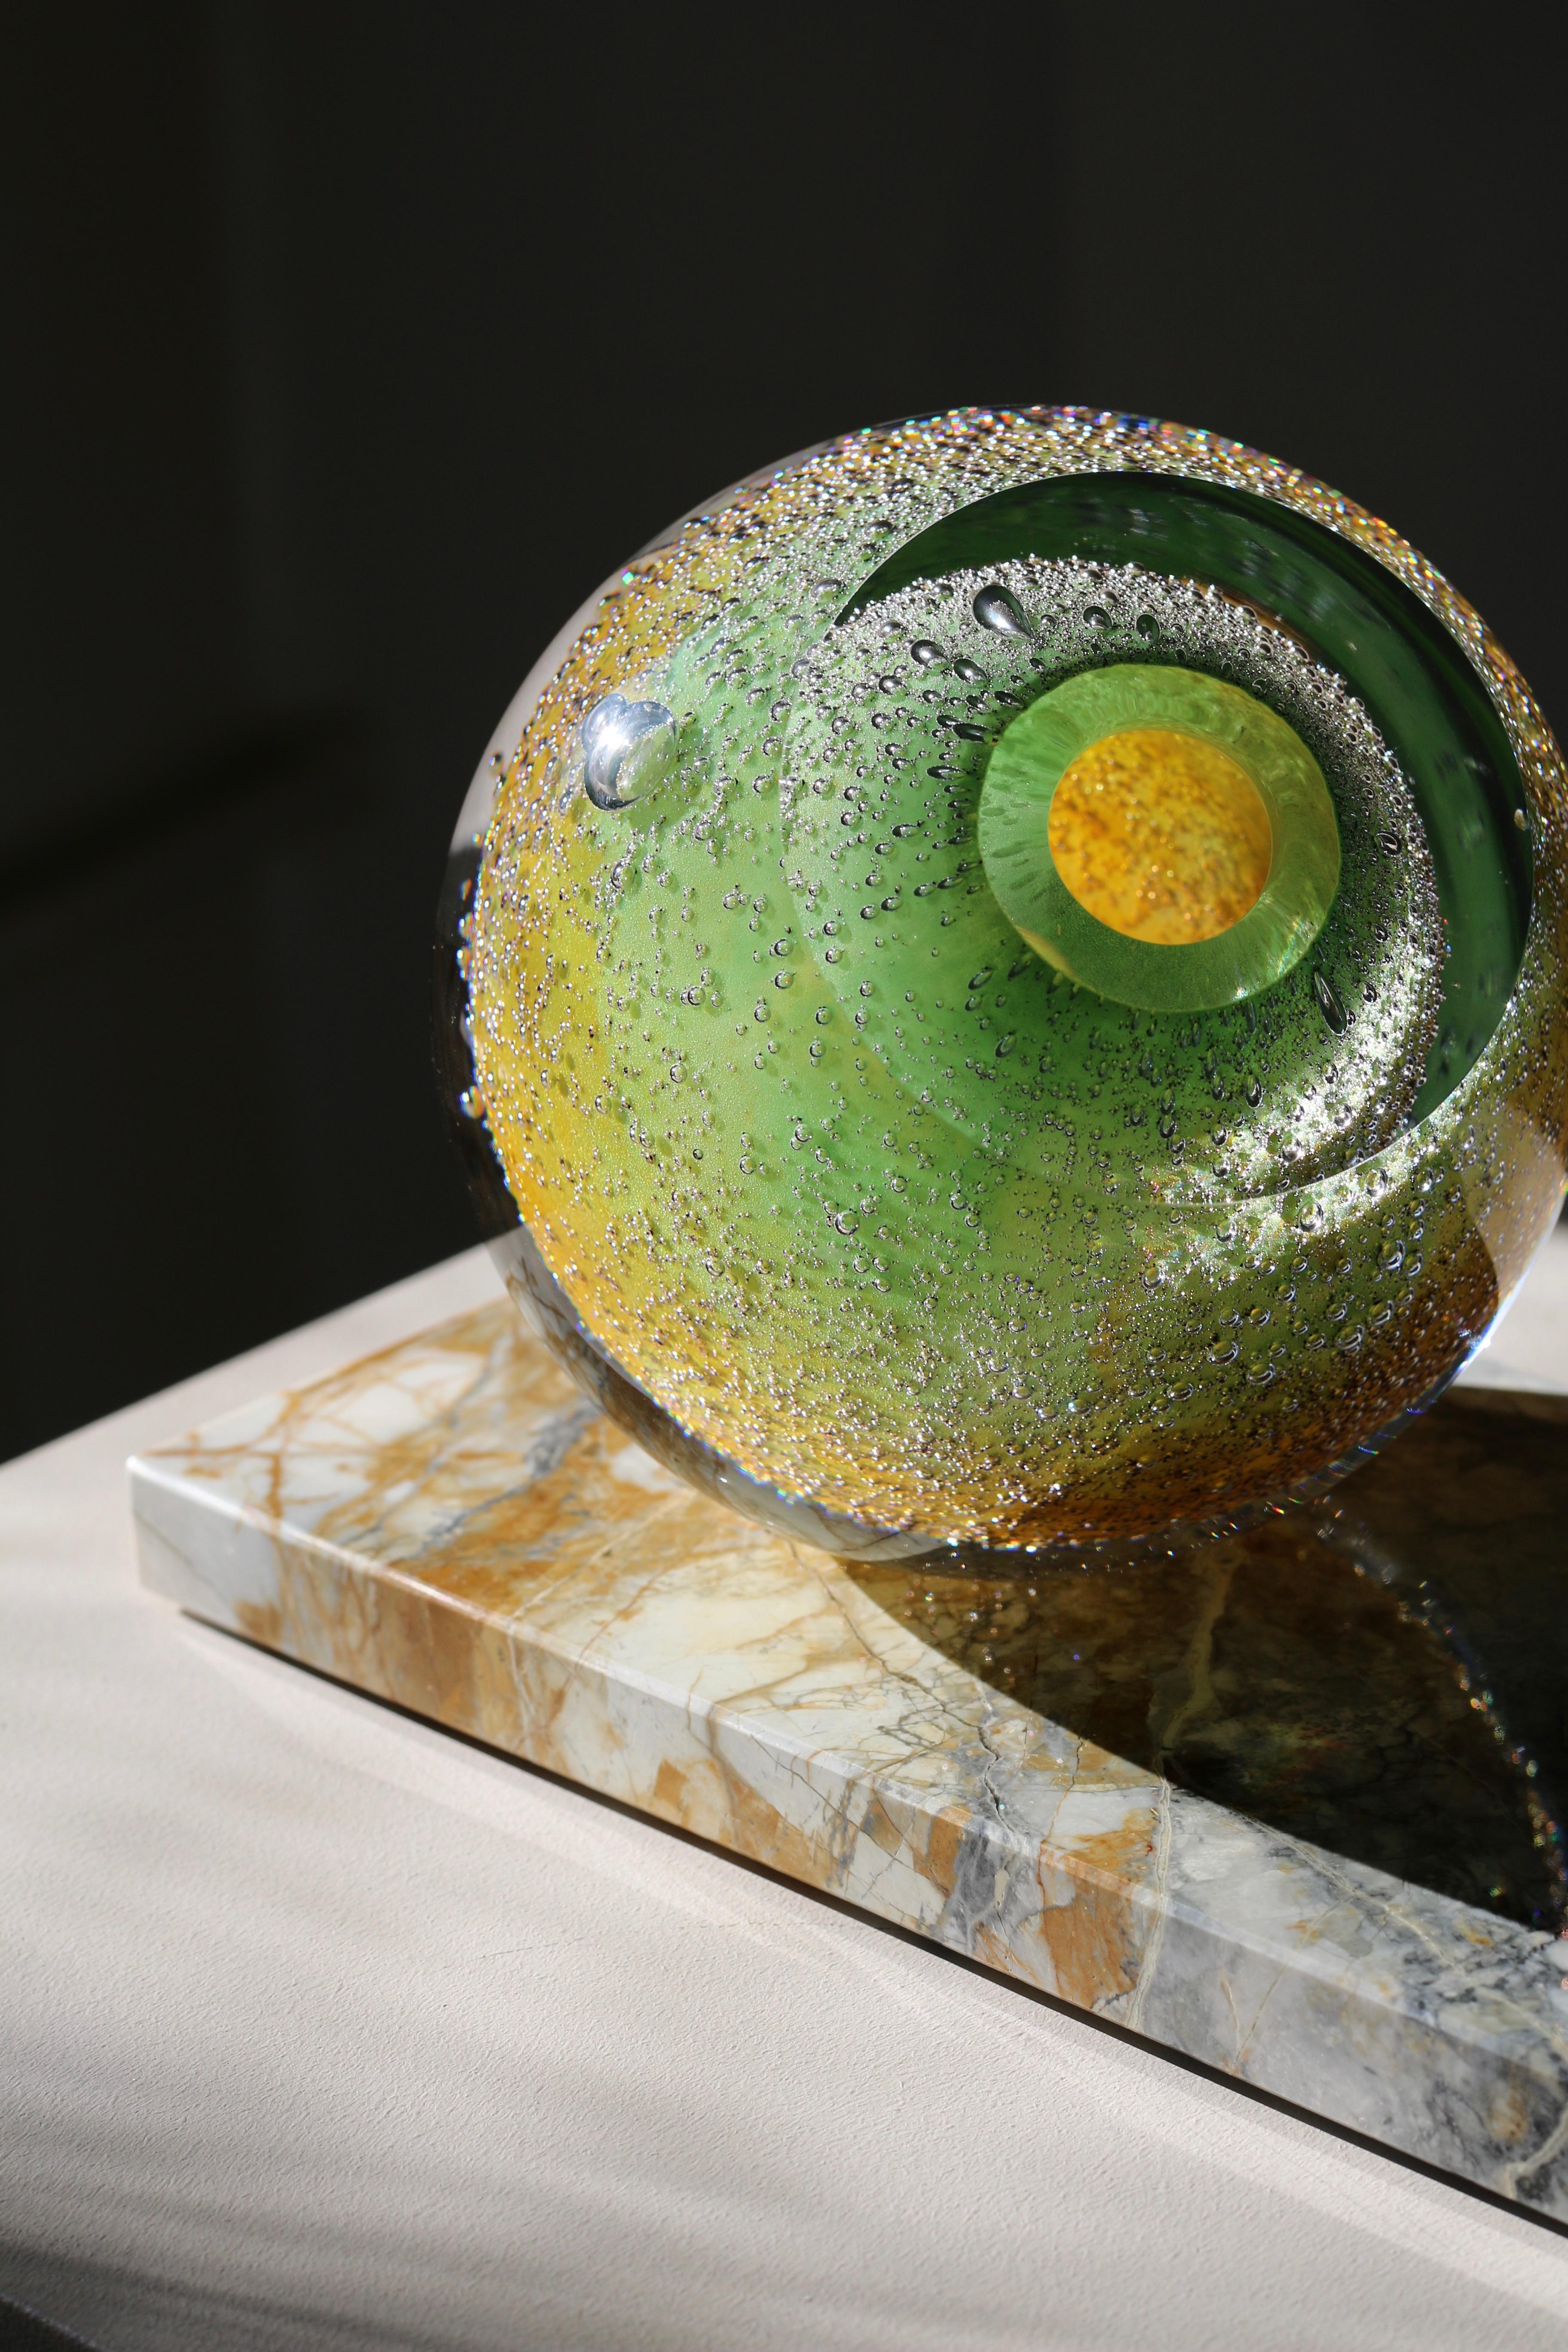 'Venus Eye' freeform mouth-blown glass vase on Côte d'Azur marble. 
Extra-clear top quality and lustrous glass tinted in warm green to grey. 
This contemporary small scale sculpture is a unique piece from collection Experimental. 
Design and